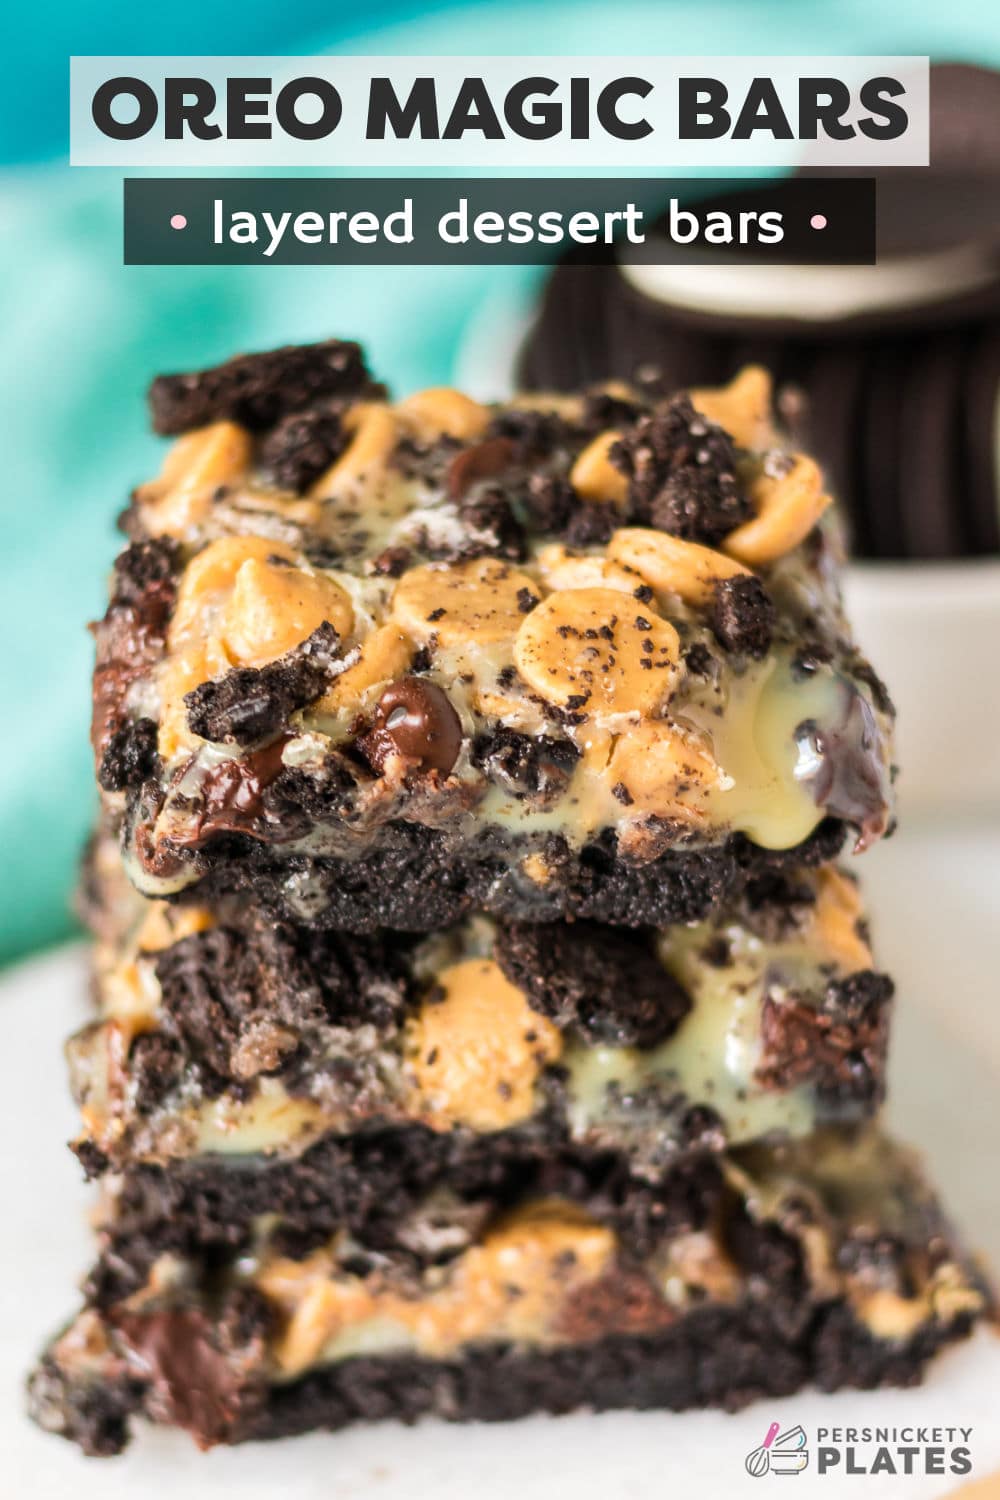 Oreo magic bars are crave-worthy and irresistible dessert bars that are made with an Oreo cookie crust, melty chocolate and peanut butter chips then topped with Oreo cookie pieces. It's all held together with sweetened condensed milk that makes these bars ooey, gooey, and always a hit. They are easy to make with just 5 ingredients and it's all baked in under 30 minutes! | www.persnicketyplates.com